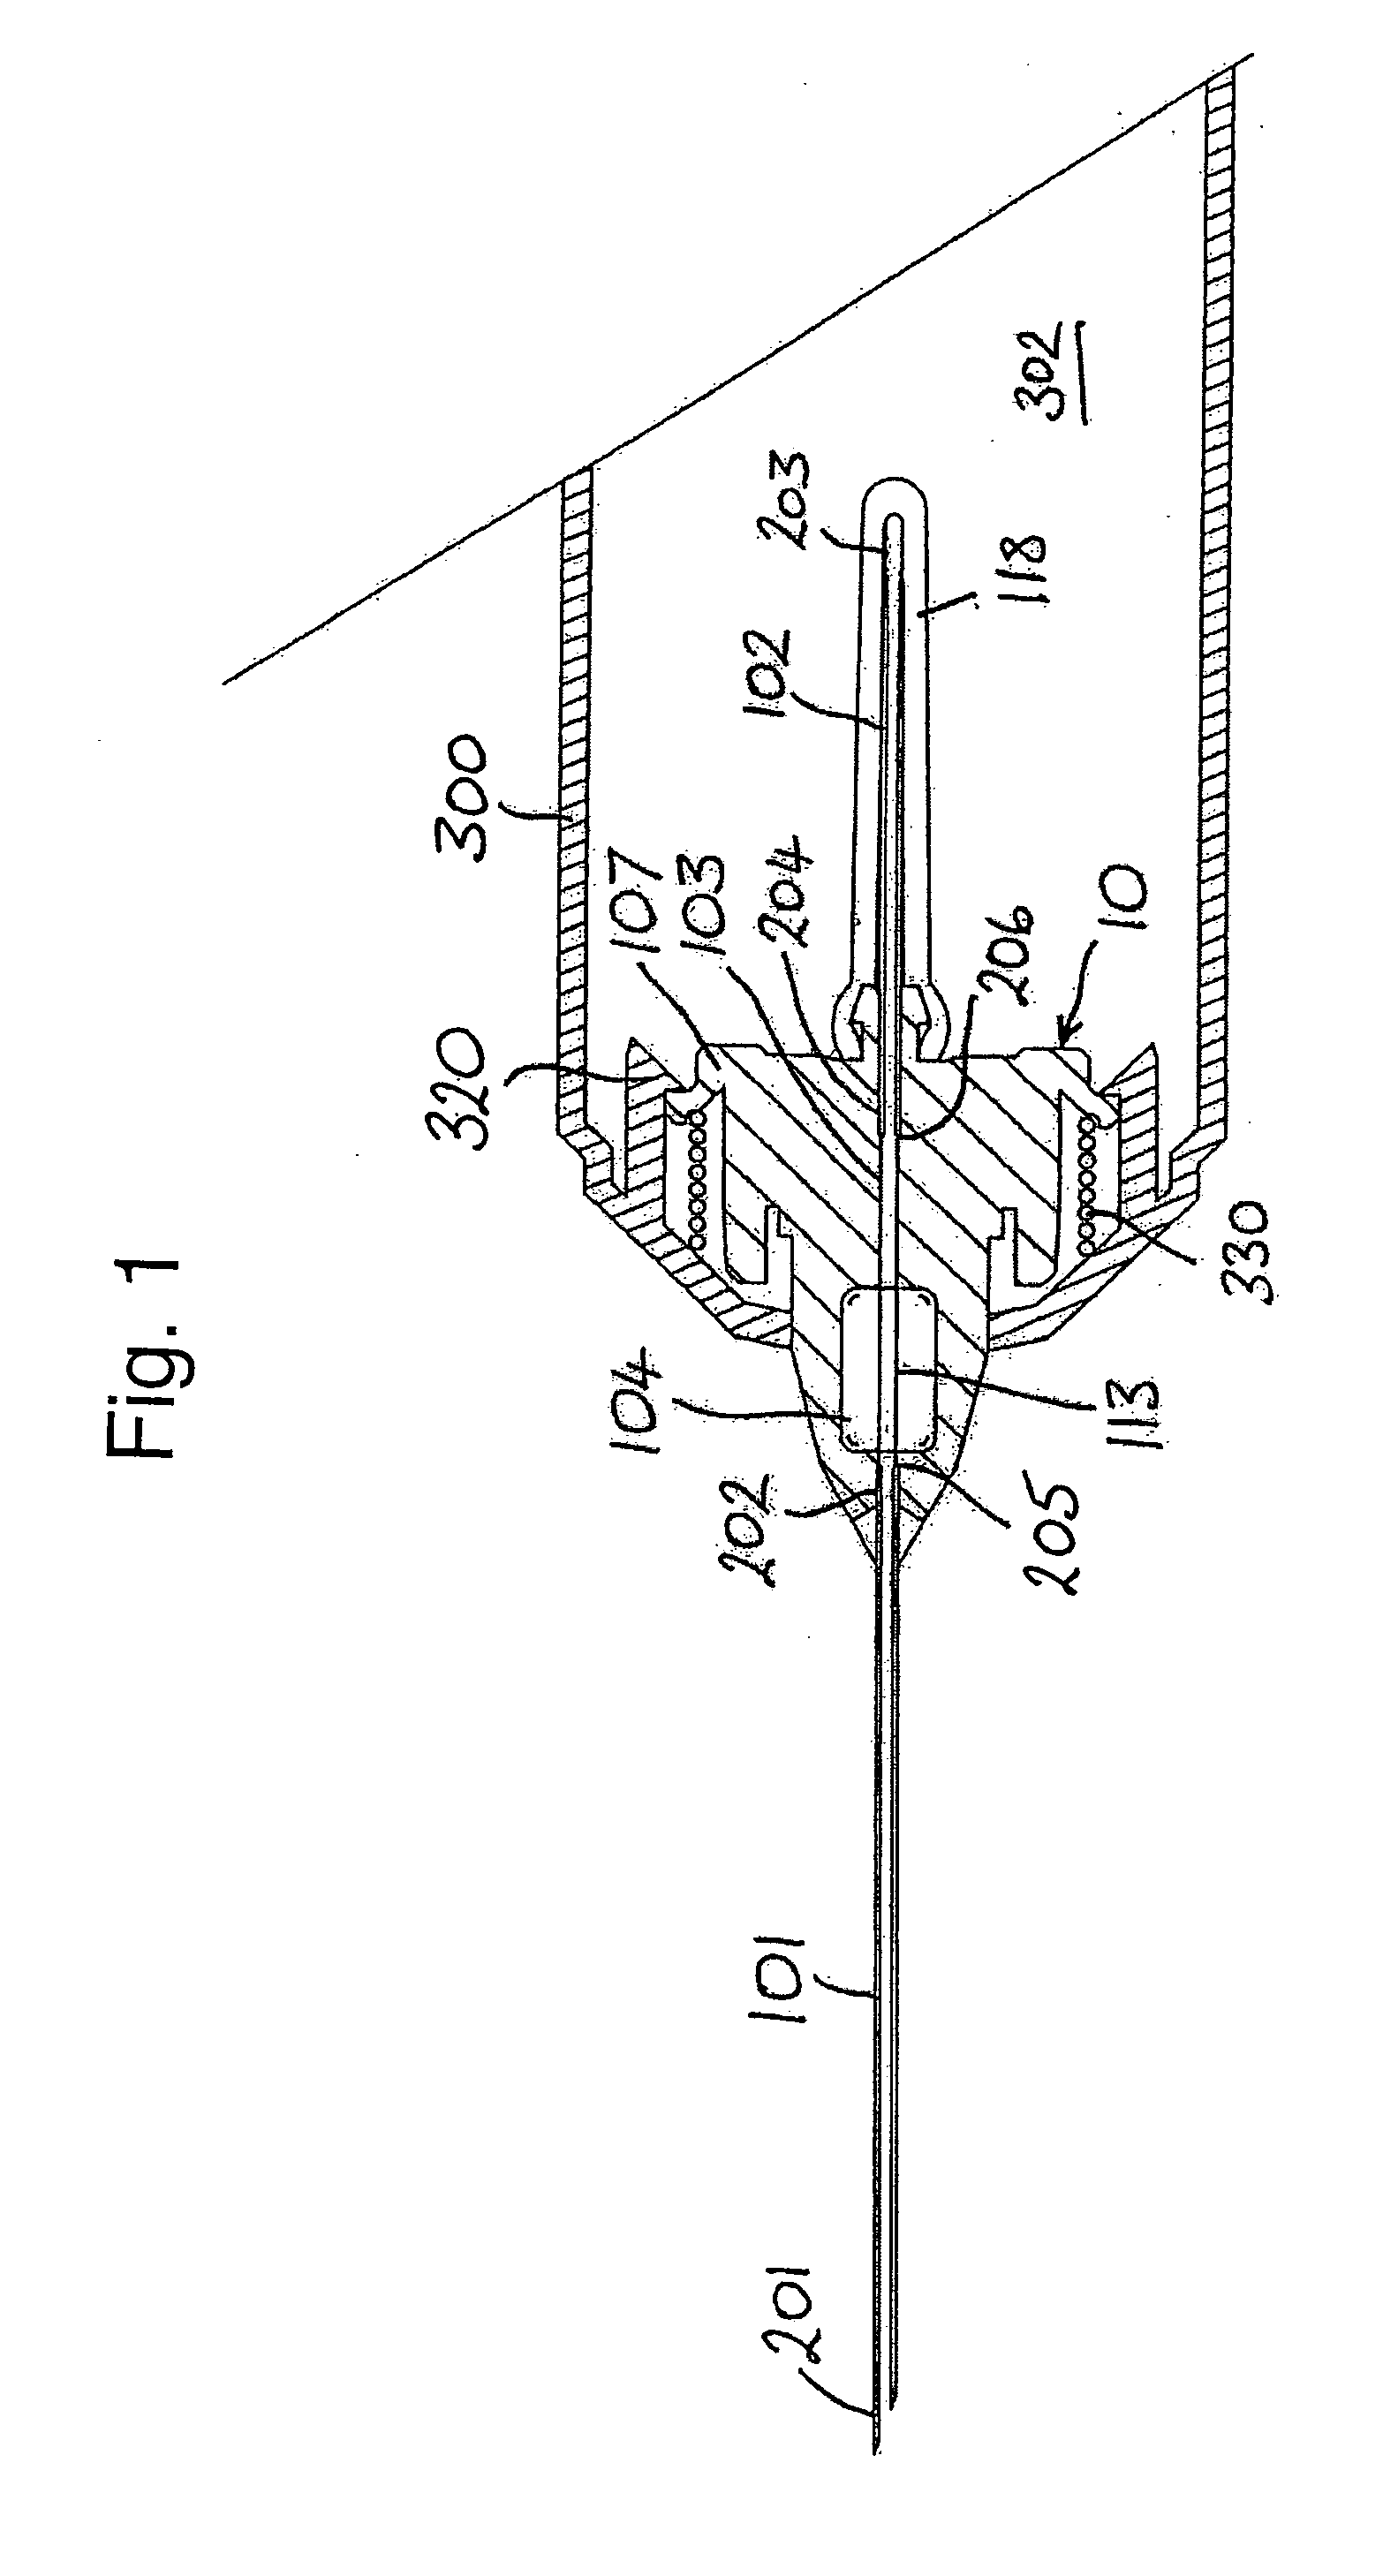 Needle assembly for a blood sampling device